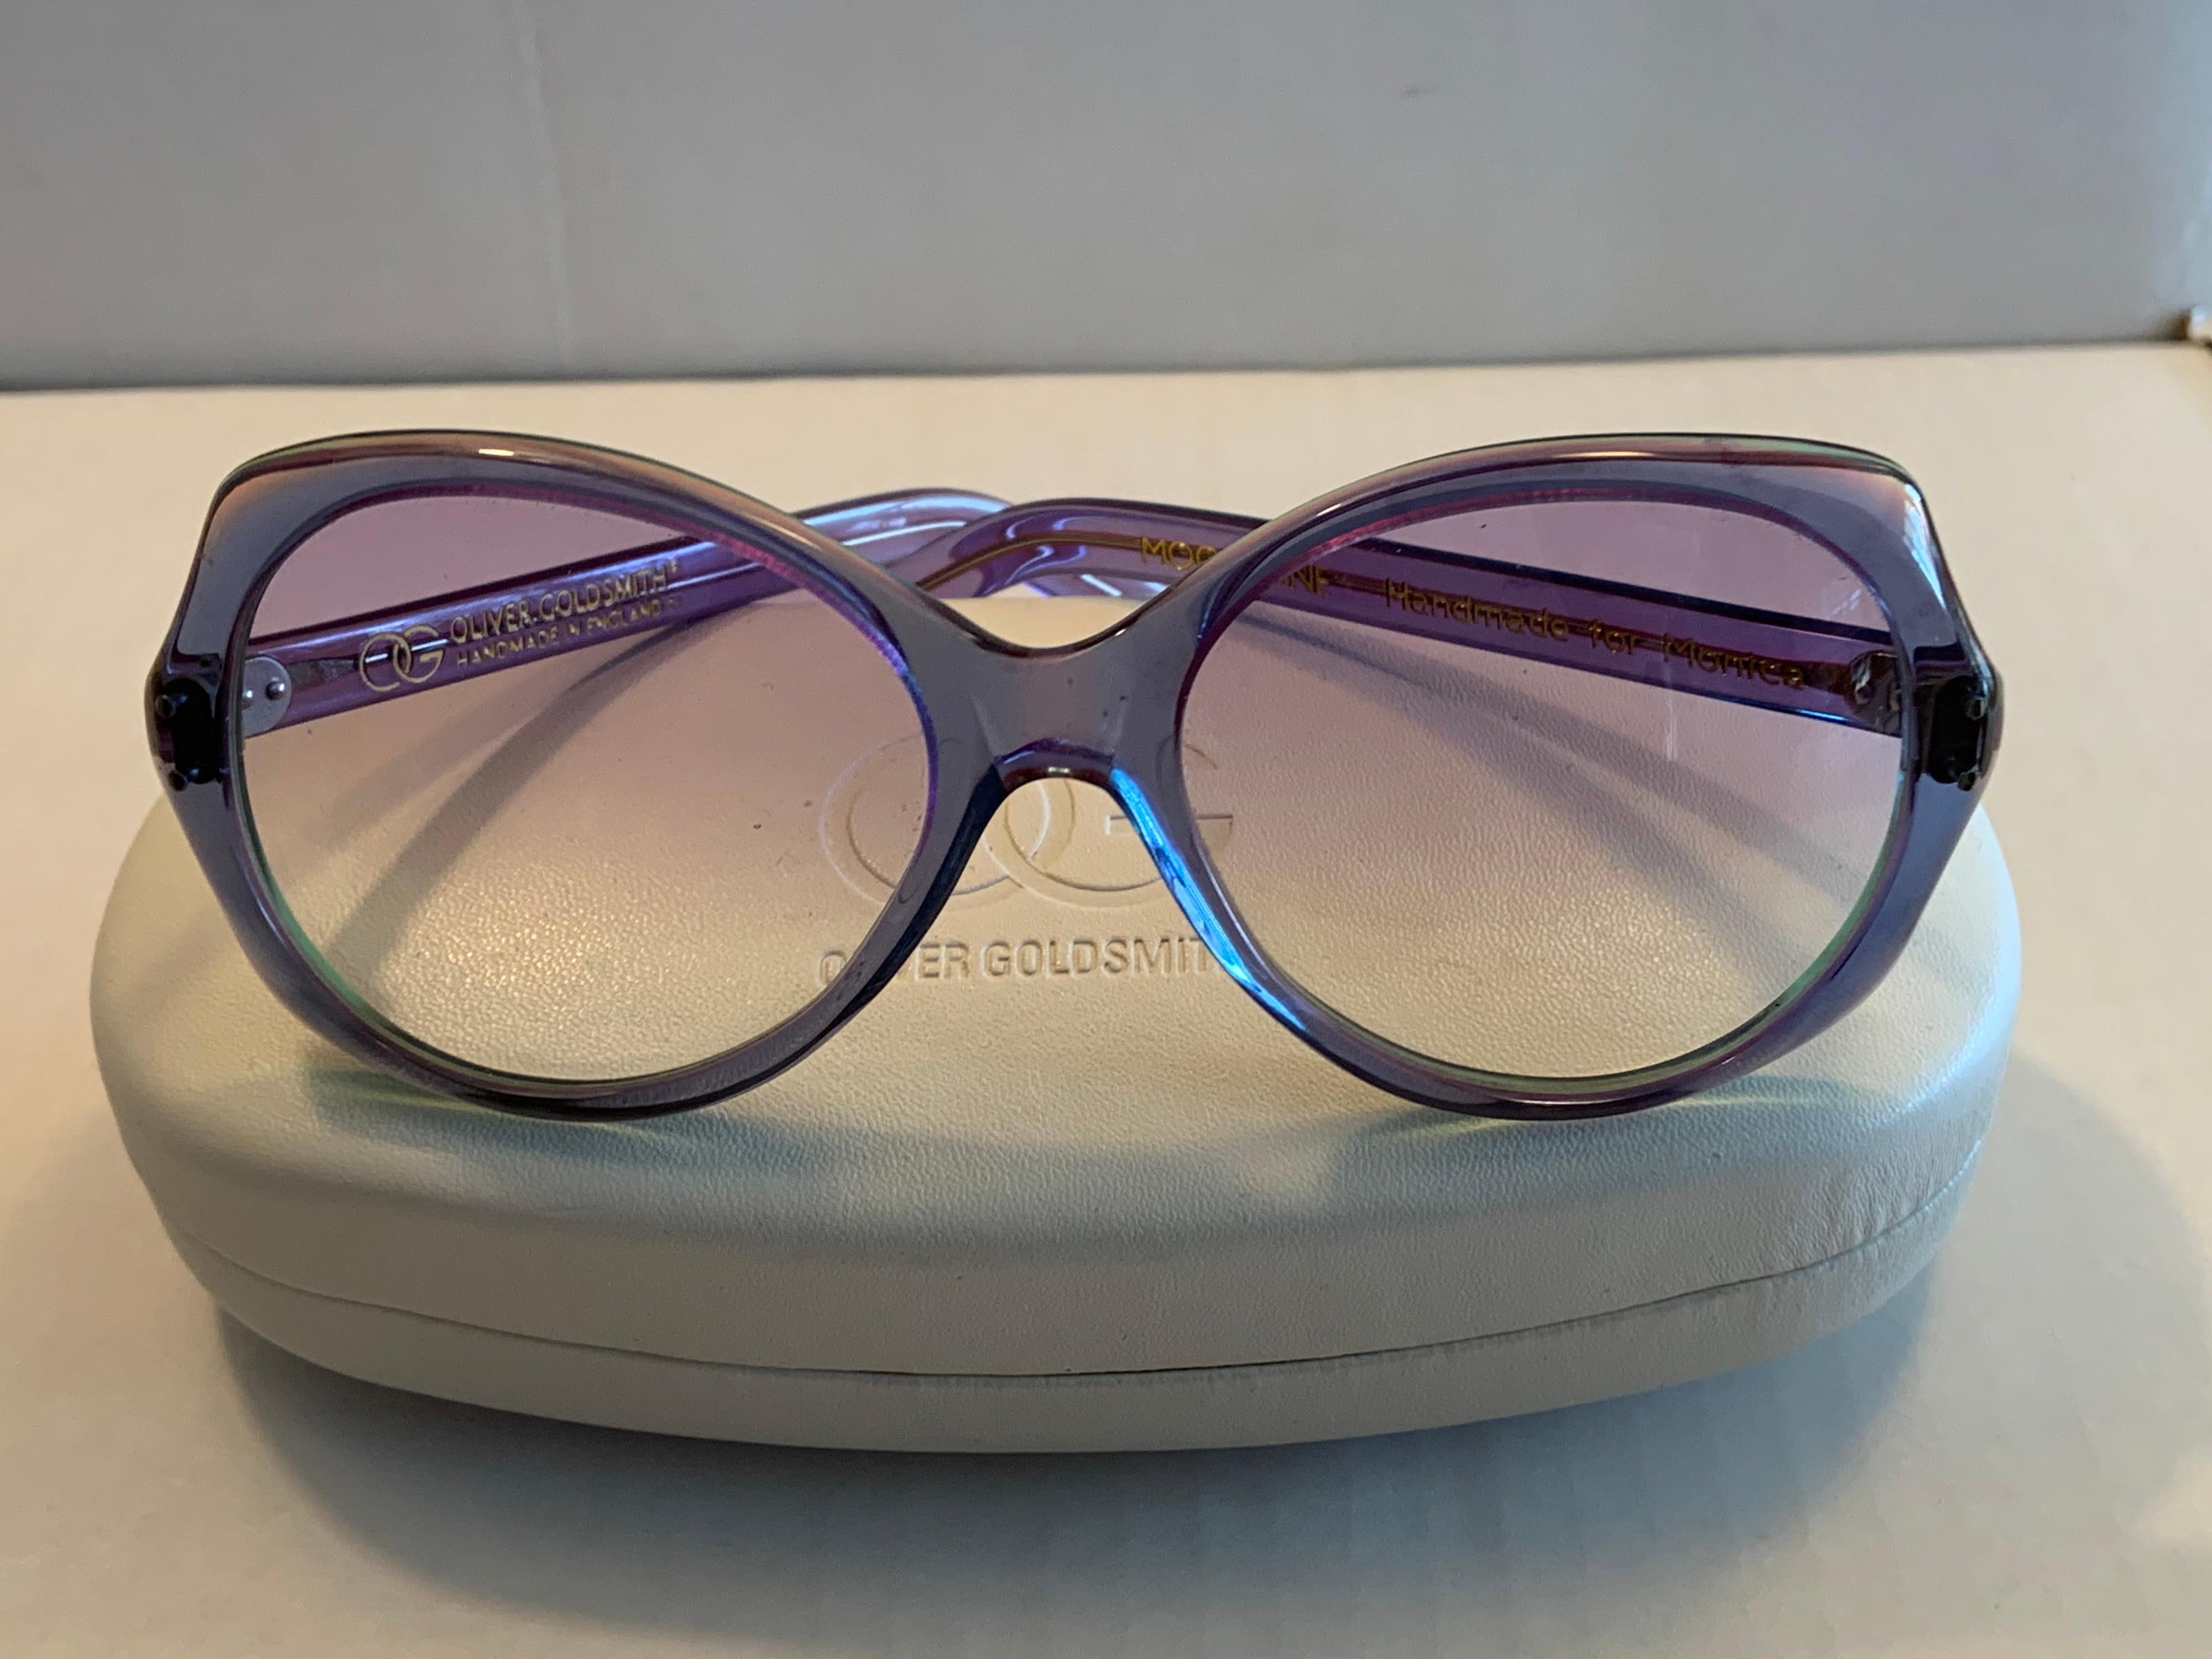 Oliver Goldsmith designed these hand made sunglasses with lavender tinted lenses paired with lavender, green and magenta layered frames to create a truly eye catching look! The sunglasses are in pristine condition and appear to be unworn. They are